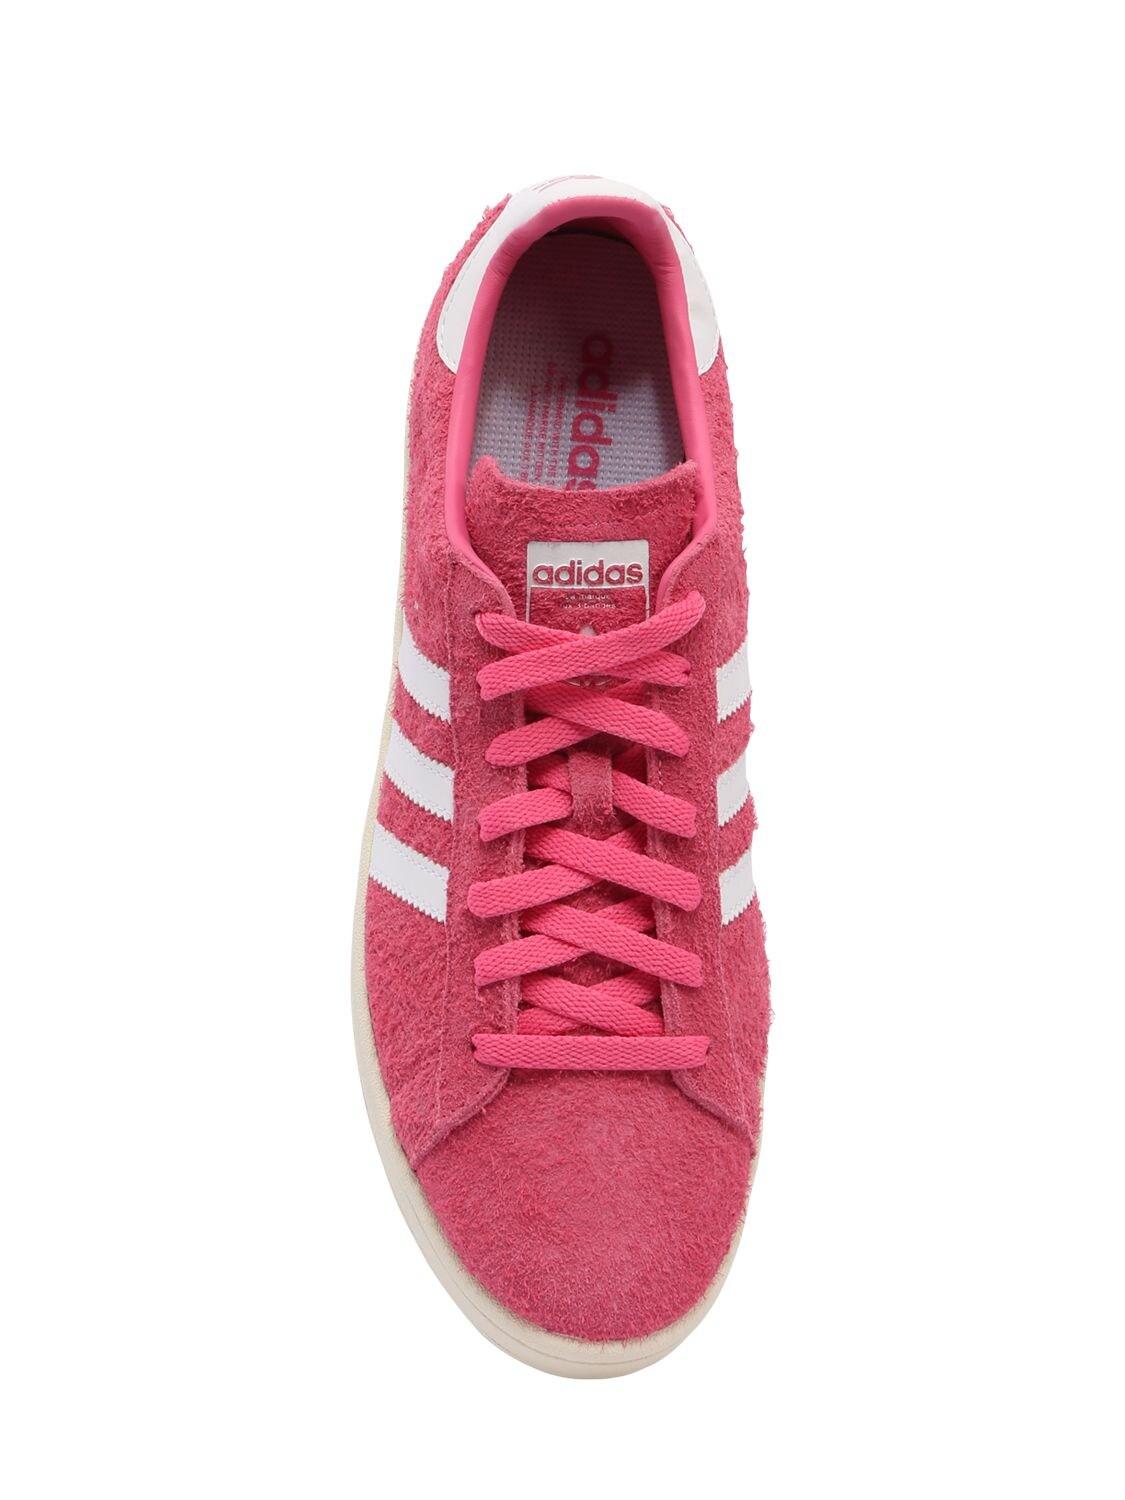 adidas Originals Campus Hairy Suede Sneakers in Red for Men - Lyst